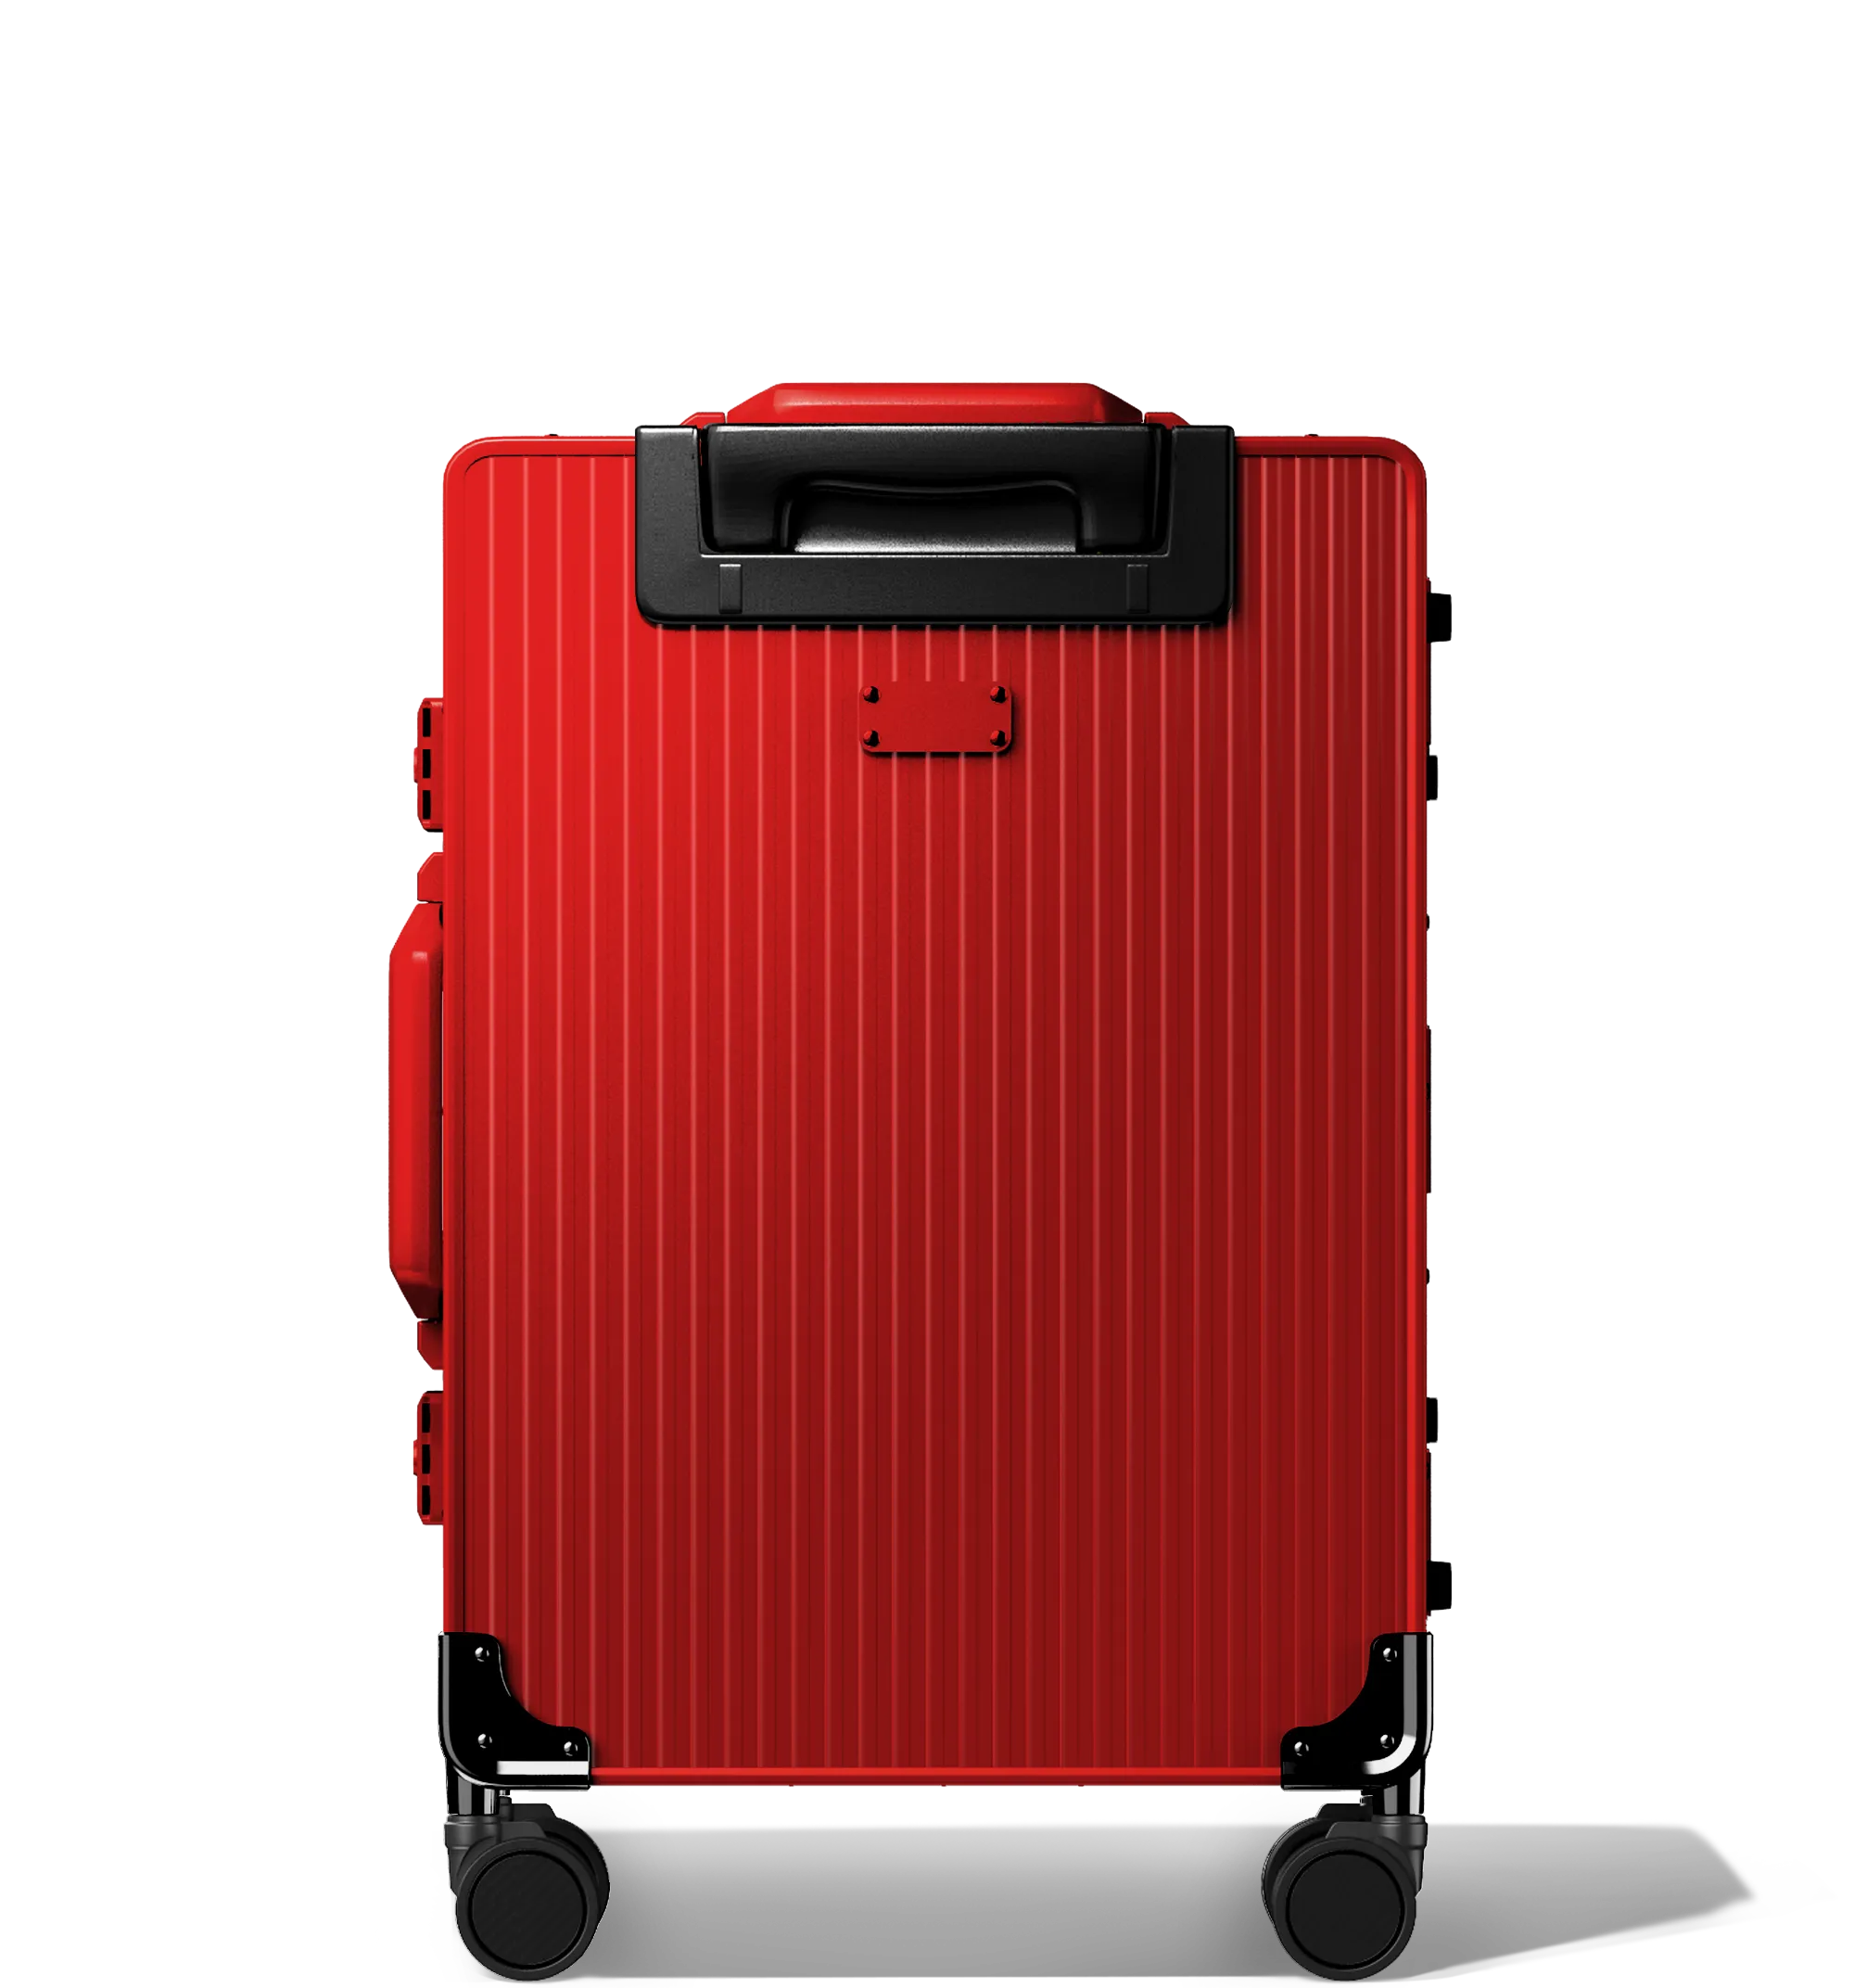 Frontal view of a red Cabin in 56/20 , vertical hard-shell aluminium Luggage with ribbed texture, featuring a top handle, side latches, and four multi-directional spinner wheels, against a white background.